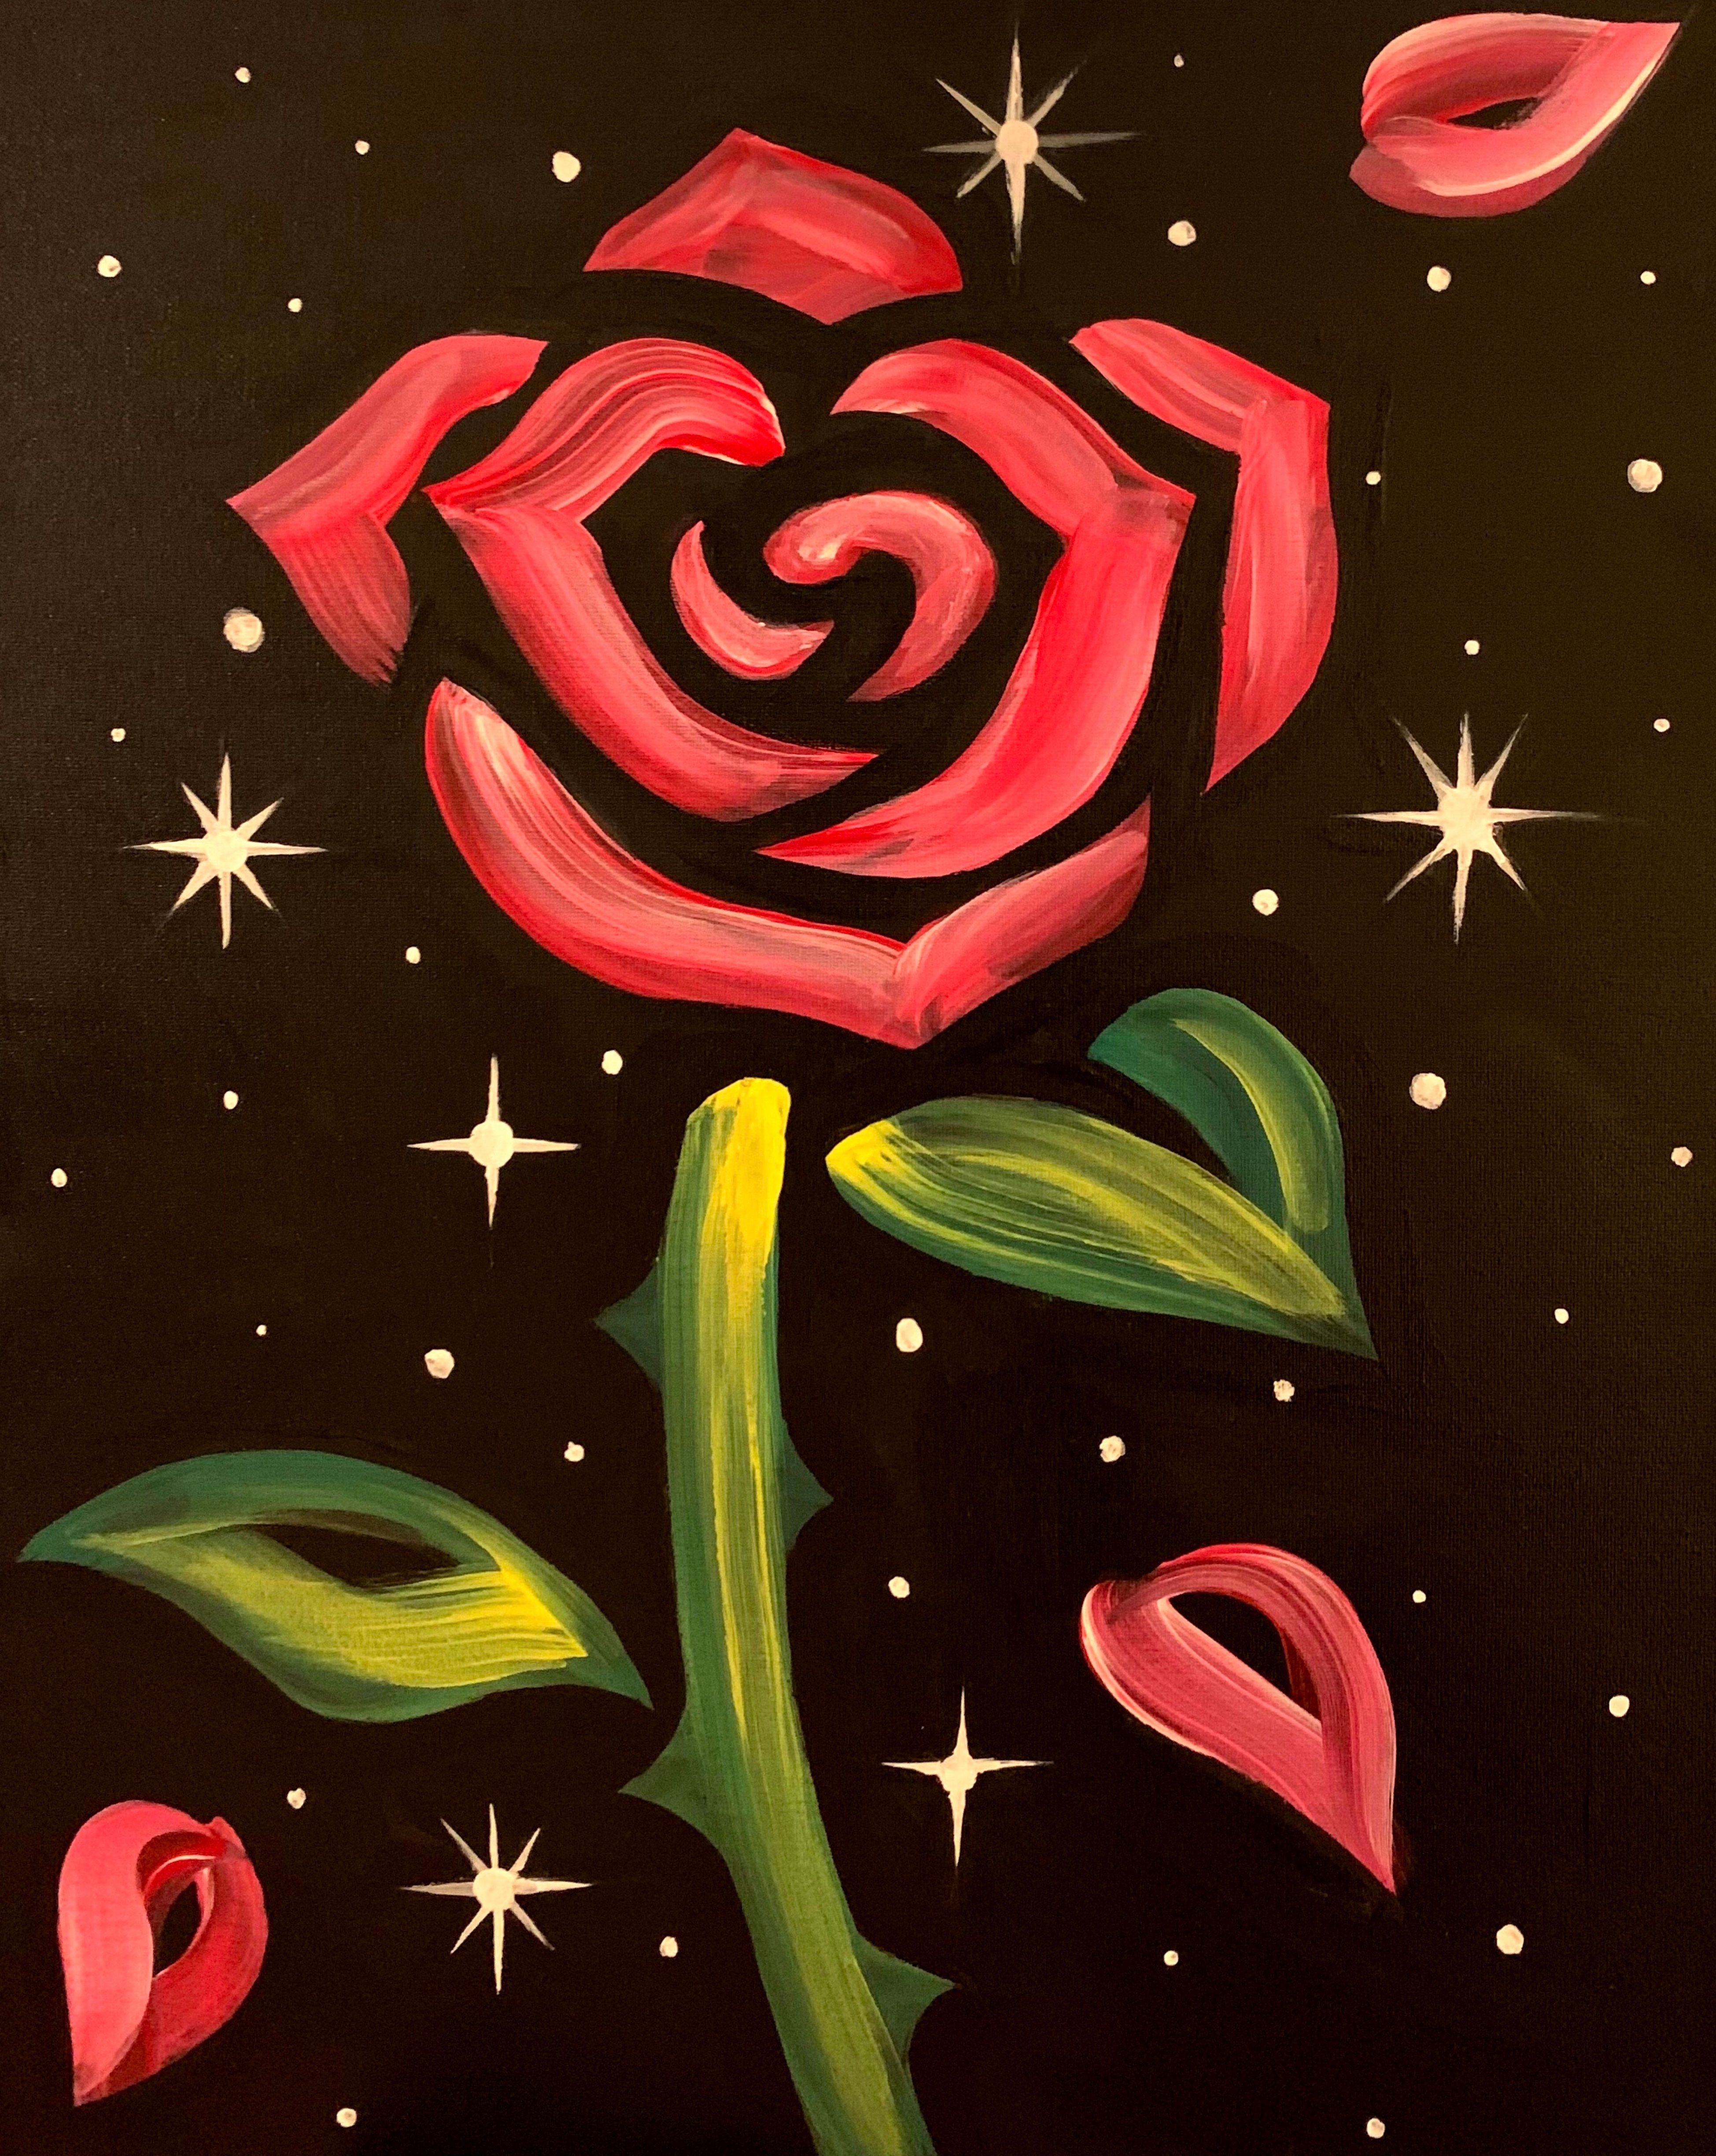 A Starry Rose experience project by Yaymaker